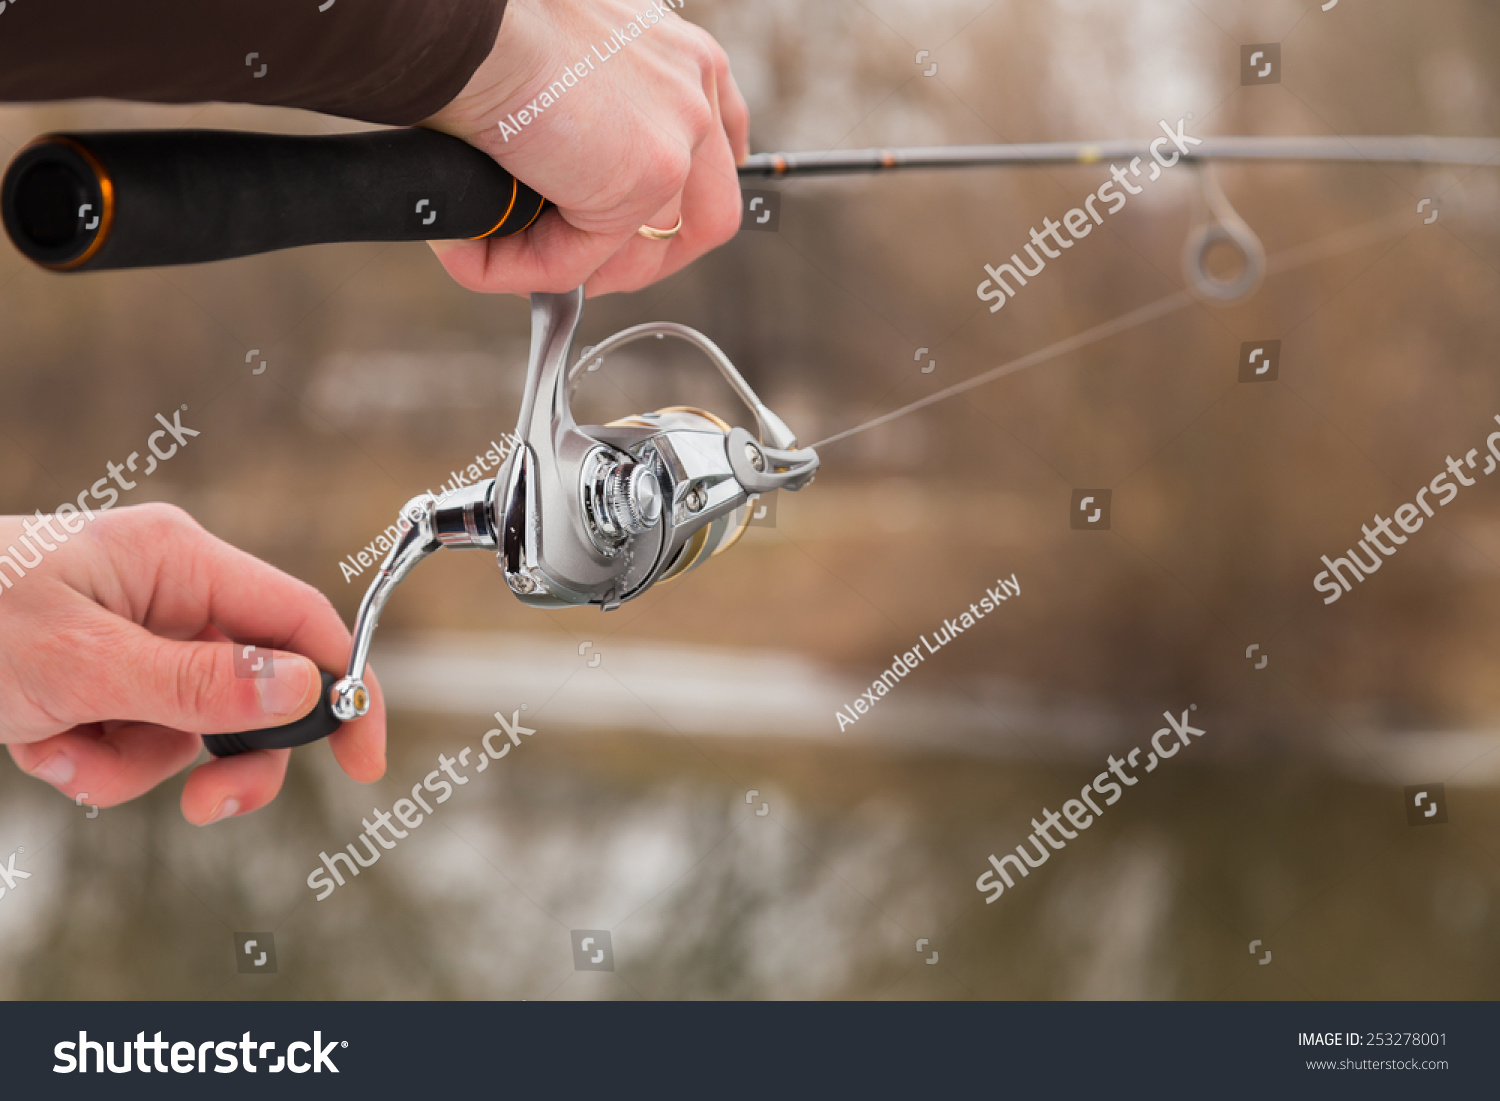 Winter spinning. Fishing in winter. Fisherman on the river bank. Fisherman holding a light spinning rod in his hand. Suburban recreation, sport fishing. Active Life on a fishing trip. #253278001